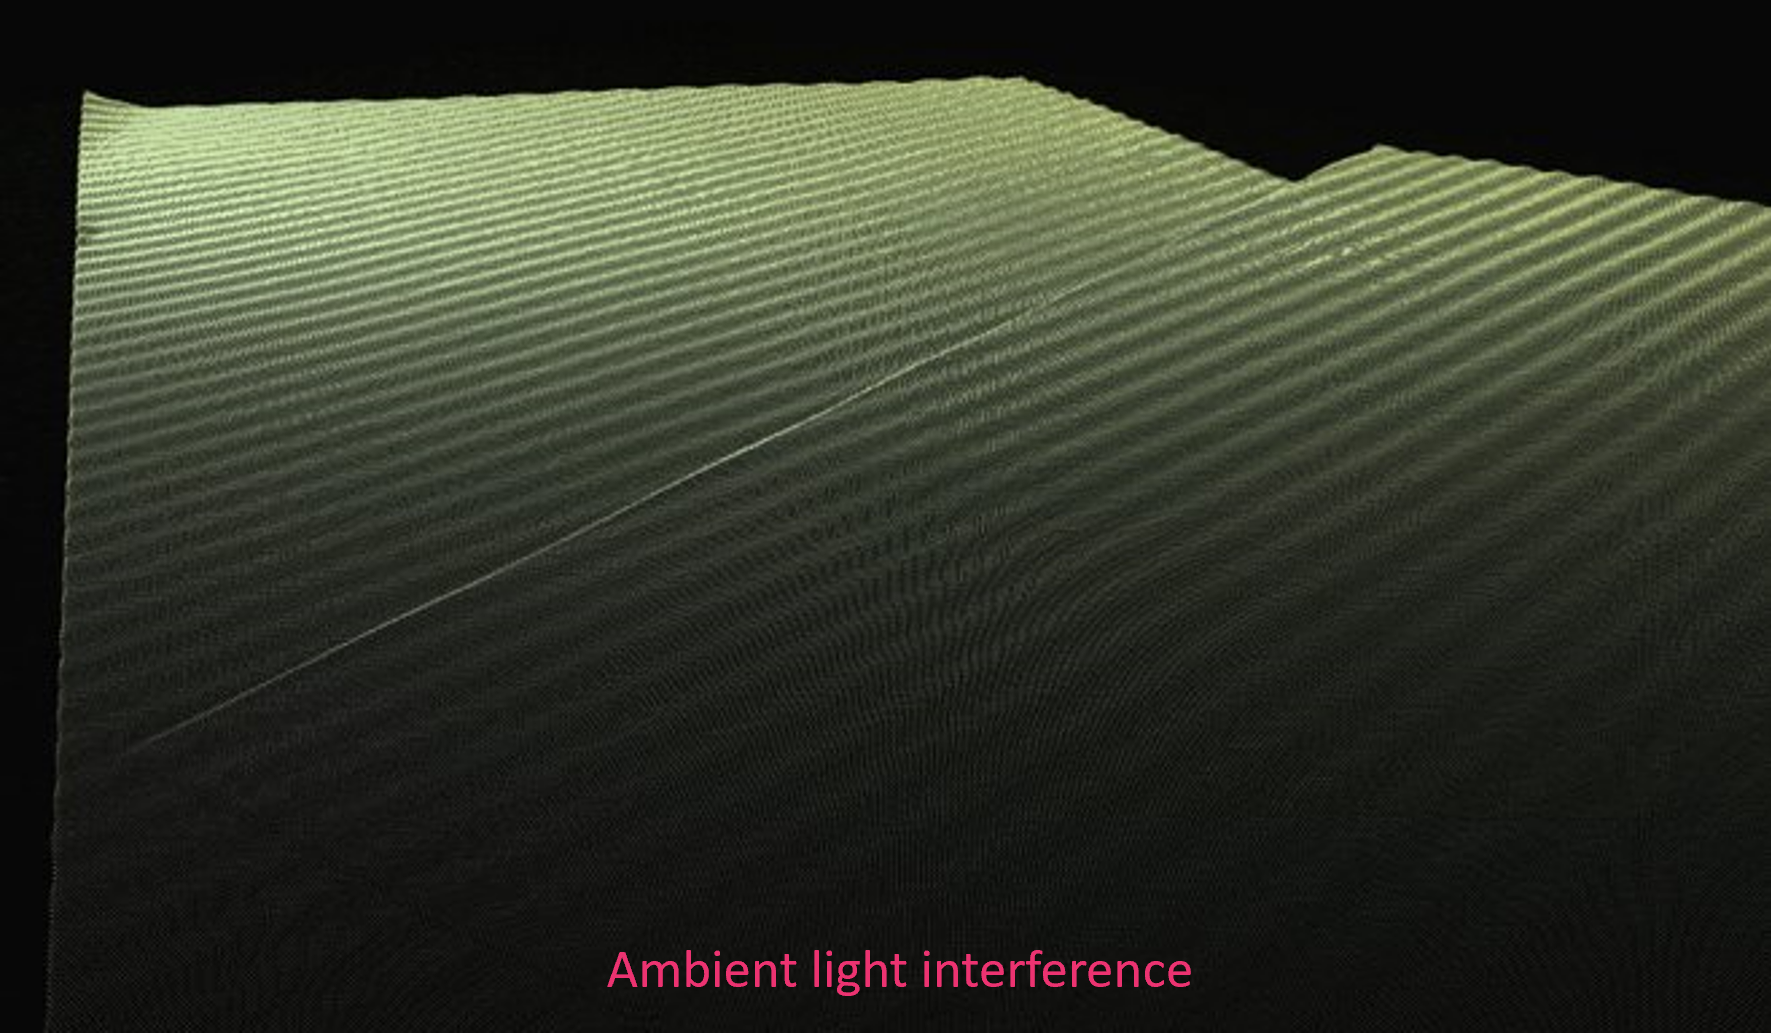 Interference on a flat surface from strong ambient light